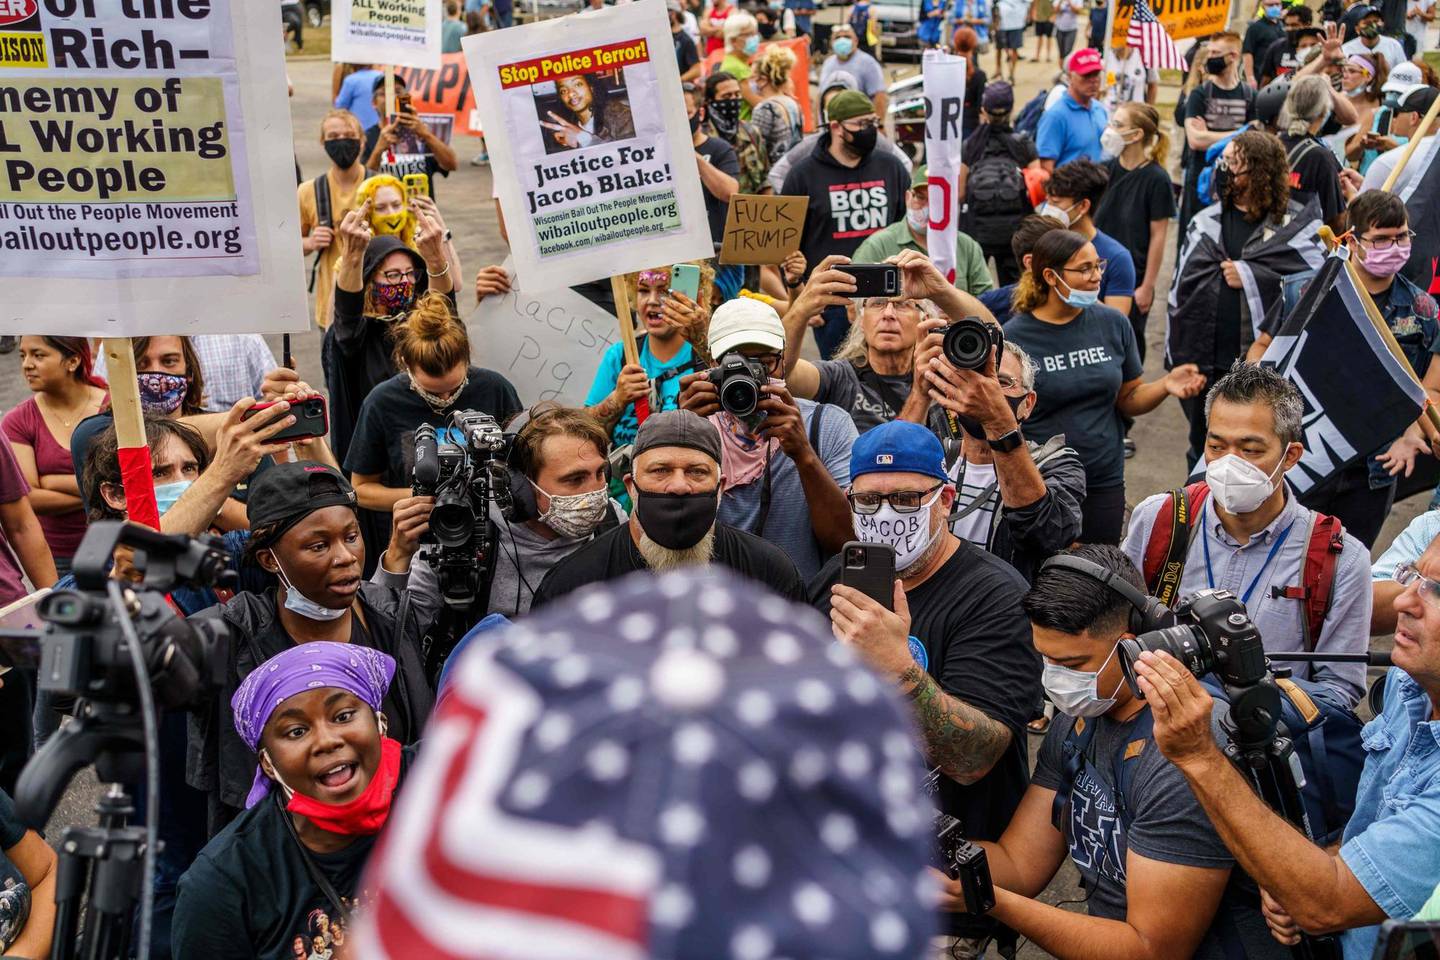 Protesters confront a Trump supporter (foreground) during a demonstration in front of the Kenosha, Wisconsin, Courthouse on September 1, 2020, during the visit of the US president amid ongoing protests after the shooting by police of Jacob Blake. - Trump said on a visit to protest-hit Kenosha, Wisconsin that recent anti-police demonstrations in the city were acts of "domestic terror" committed by violent mobs. (Photo by Kerem Yucel / AFP)